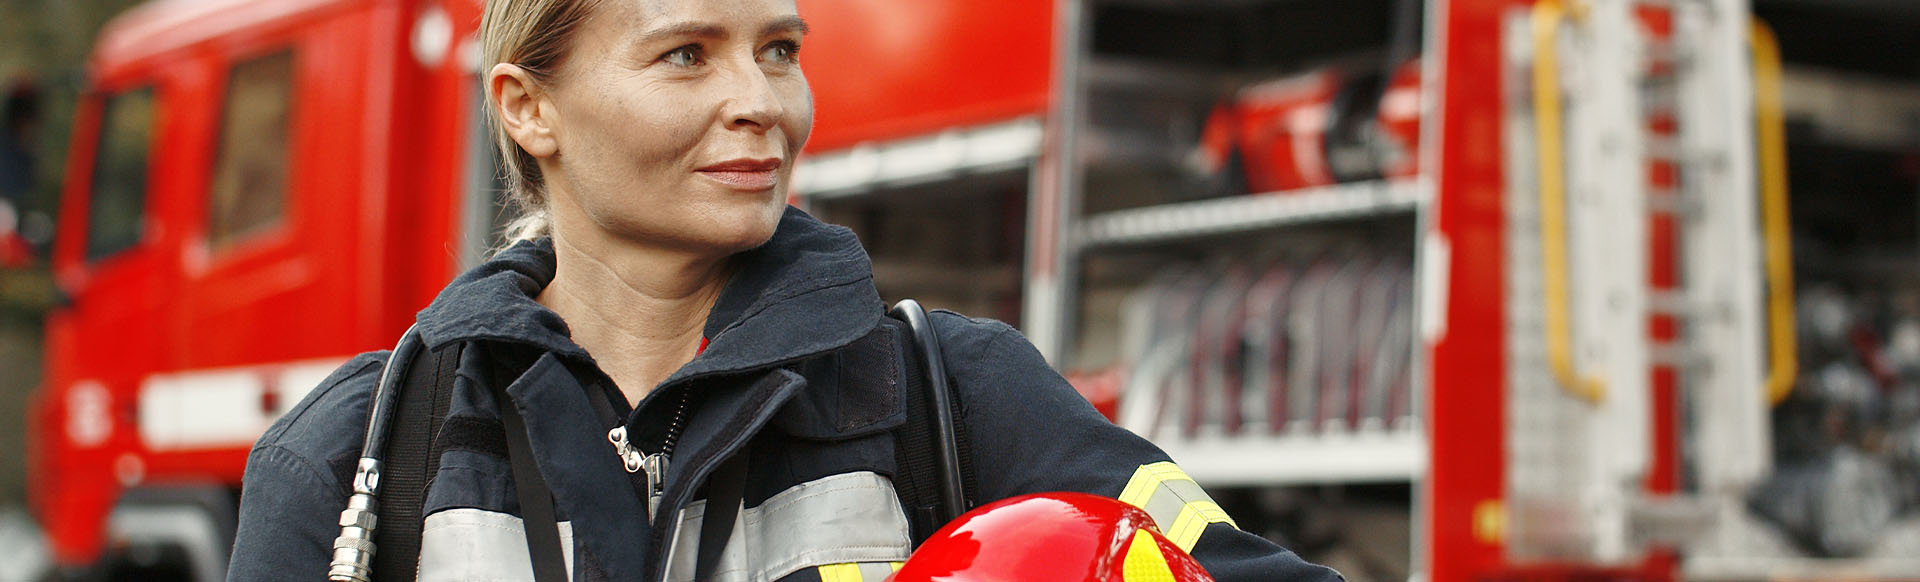 Image showing a firewoman holding her helmet in front of a fire truck